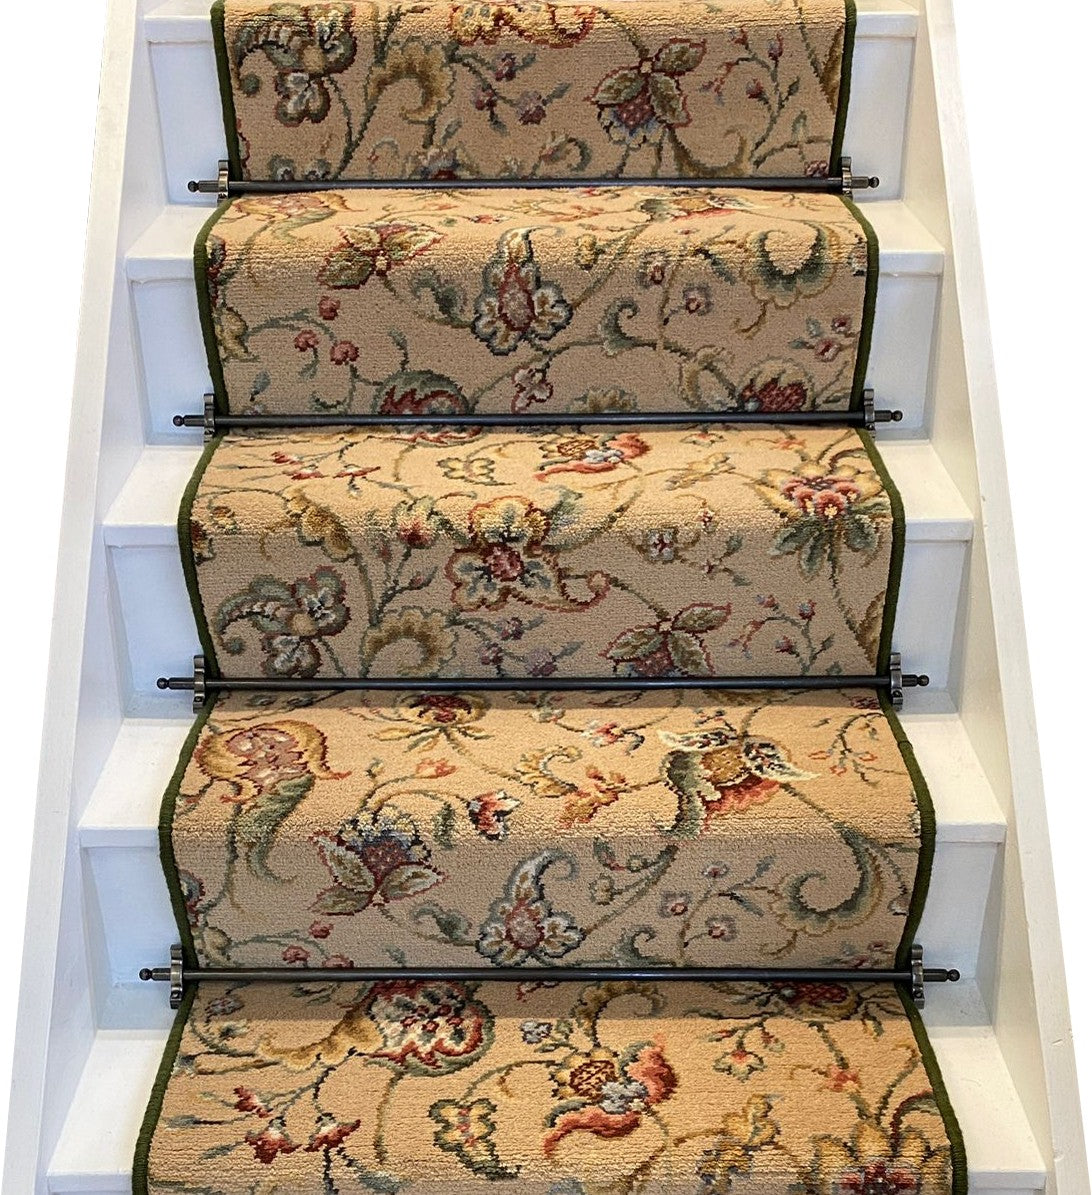 Ulster Carpets Glenavy Hampton Court Stair Runner with choice of adding bespoke border or overlocking colour (per linear metre)